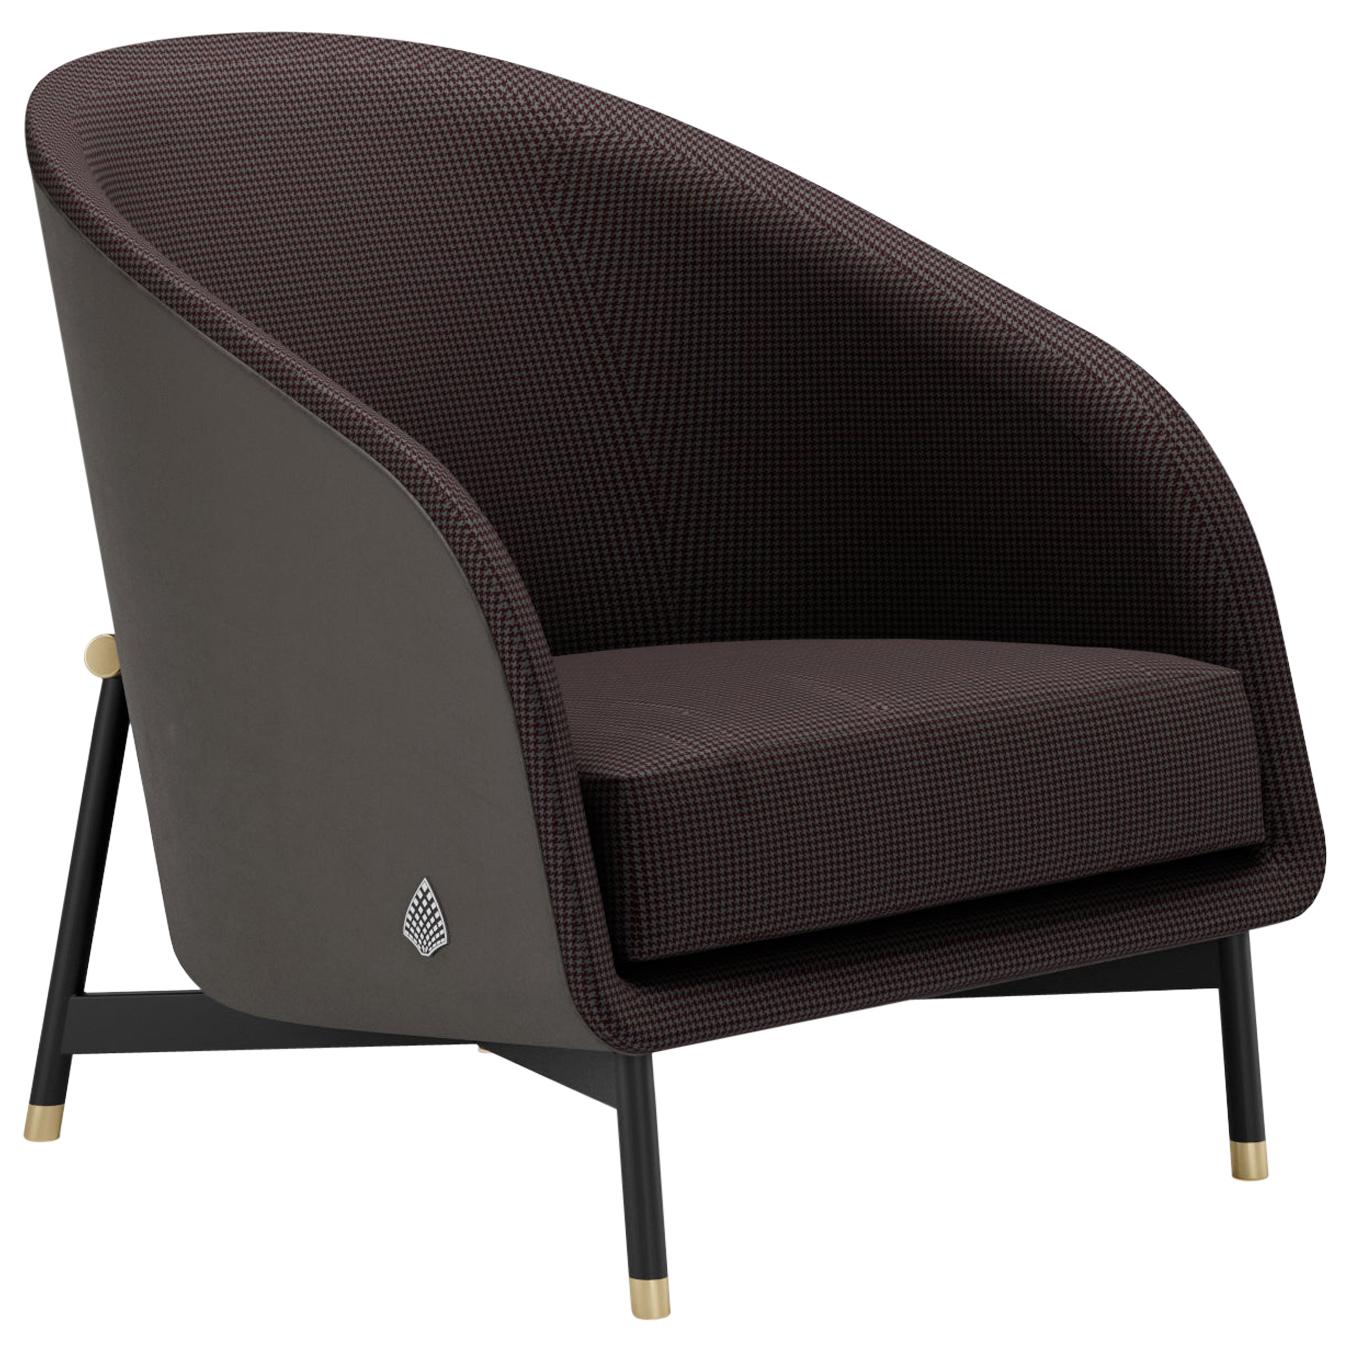 Ralph is one of the two armchair from the Hoffman collection. The hard wooden body, is covered in leather from the outside, hugging the padded fabric upholstery backrest covering. The whole structure is elevated by a metal frame the keeps the